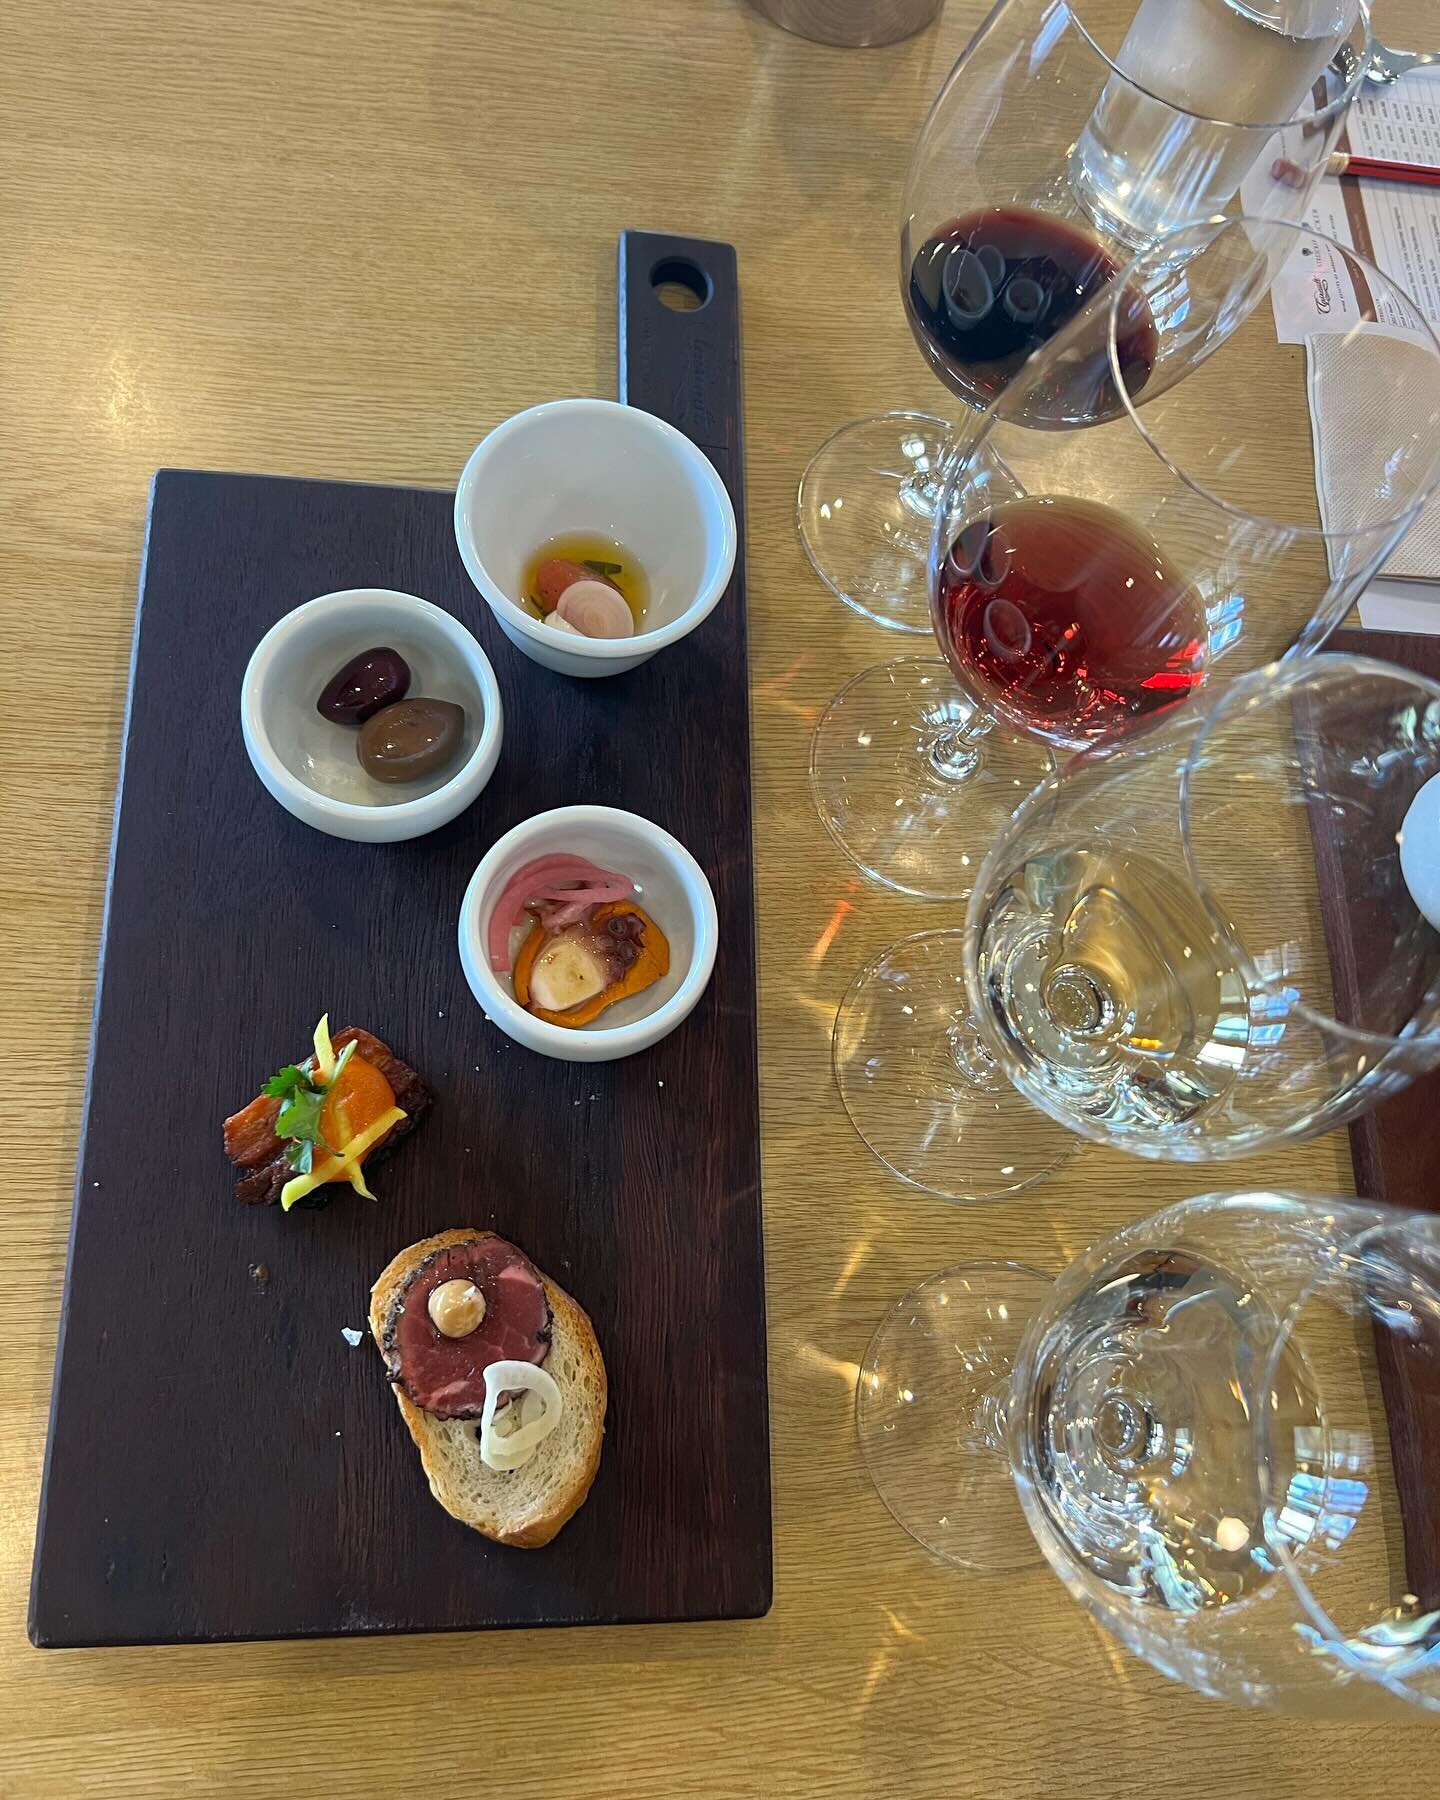 Enhance your wine tasting with a new food pairing experience. A creatively designed pairing with Western Australian products that are an artwork in themselves, as well as being delicious to eat.